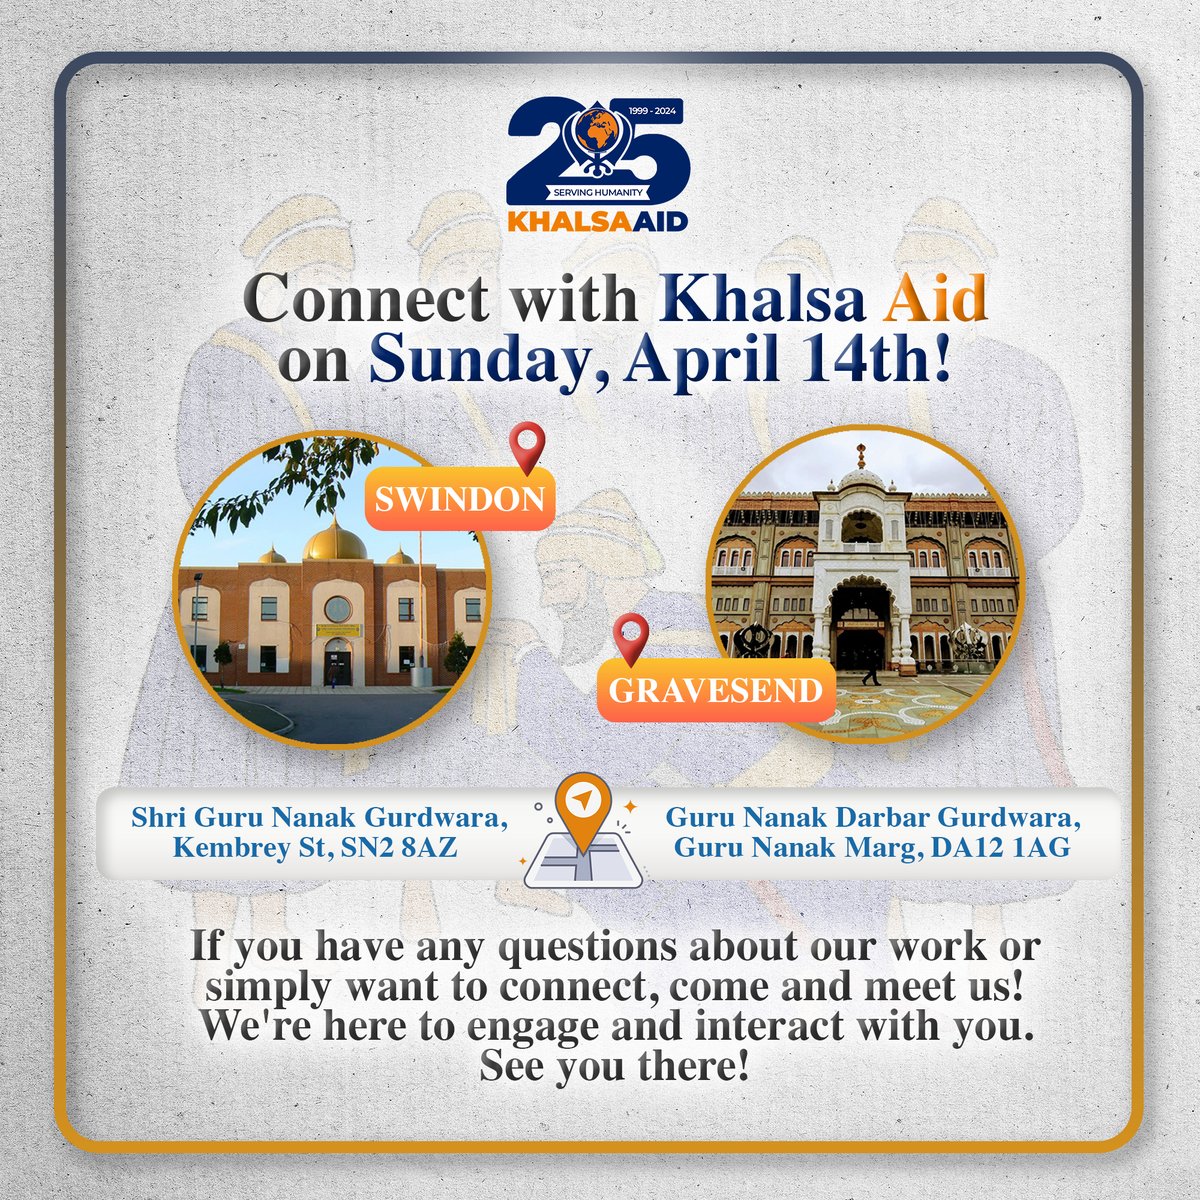 Join the #KhalsaAid team at @sgngswindon and @gravesendgurdwara Gurdwaras this Sunday, on April 14th! If you have any questions about our work or simply want to connect, come and meet us! We're here to engage and interact with you. See you there! #Baisakhi #Sangat #Seva